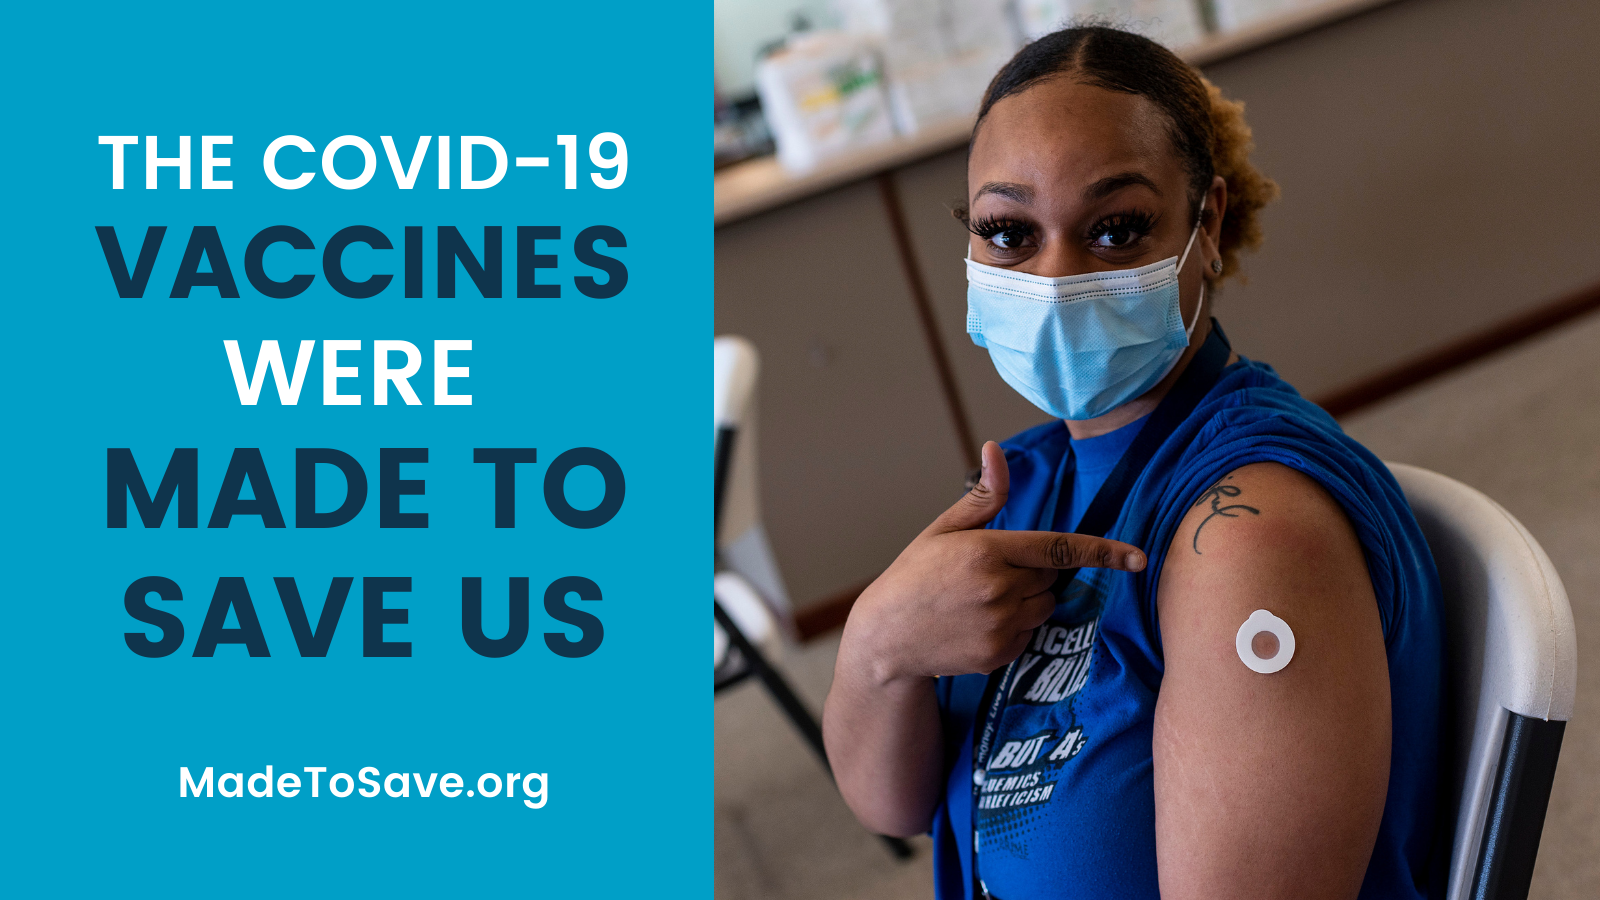 Graphic with blue background. On the left, the text reads: "The COVID-19 Vaccines Were Made to Save Us." Below in white text, says, "MadeToSave.org." On the right side of the graphic, is an image of a person pointing to a Band-Aid on their arm.